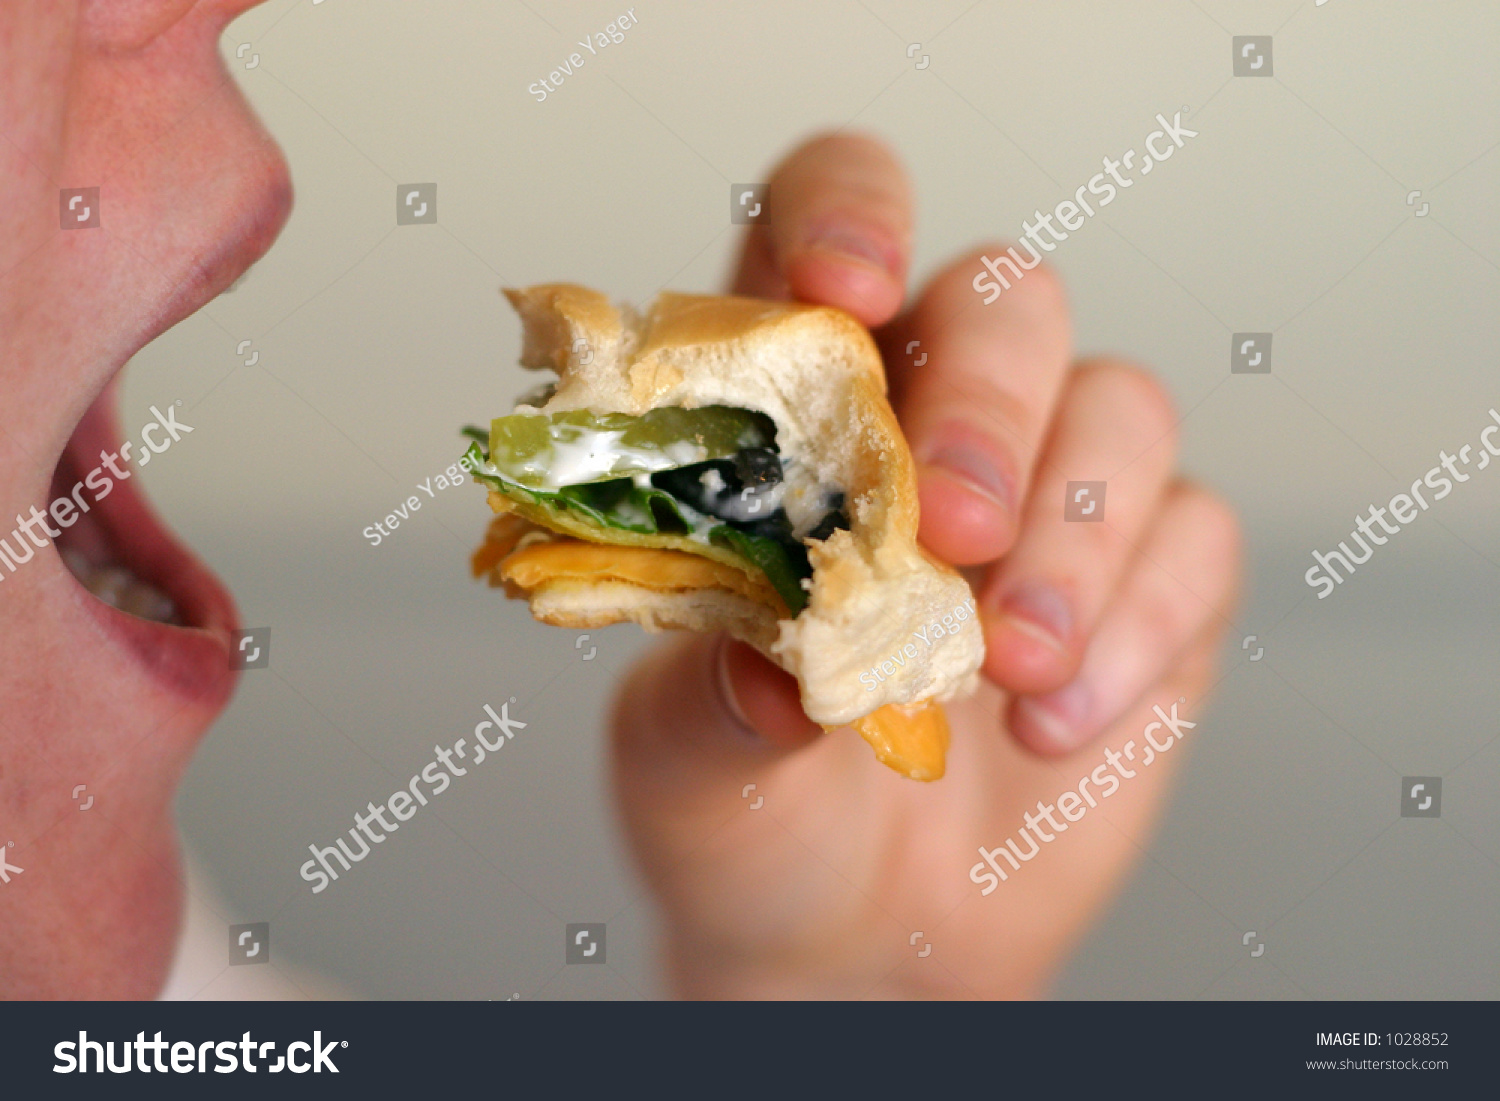 Mouth About To Take Bite Stock Photo 1028852 : Shutterstock